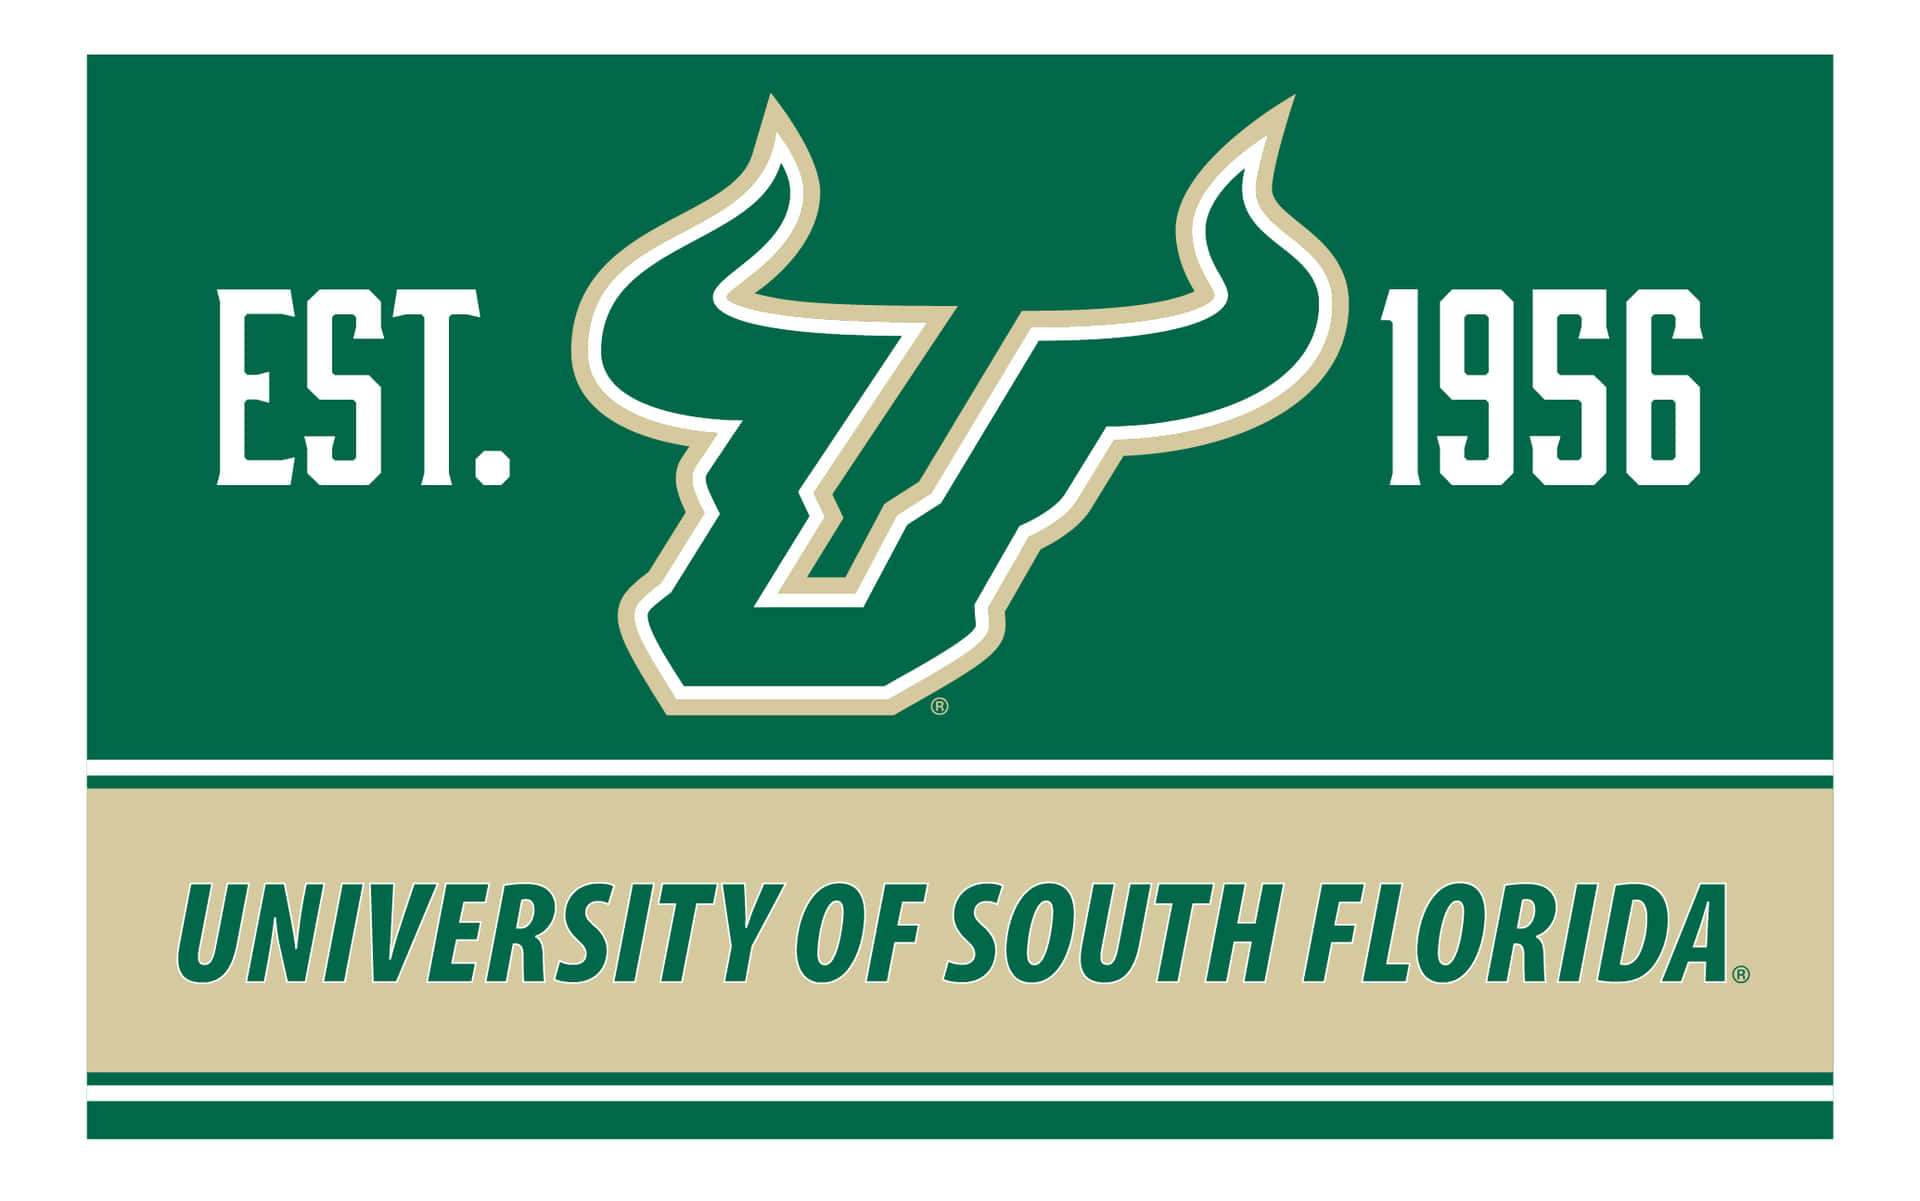 Majestic view of the University of South Florida established in 1956. Wallpaper